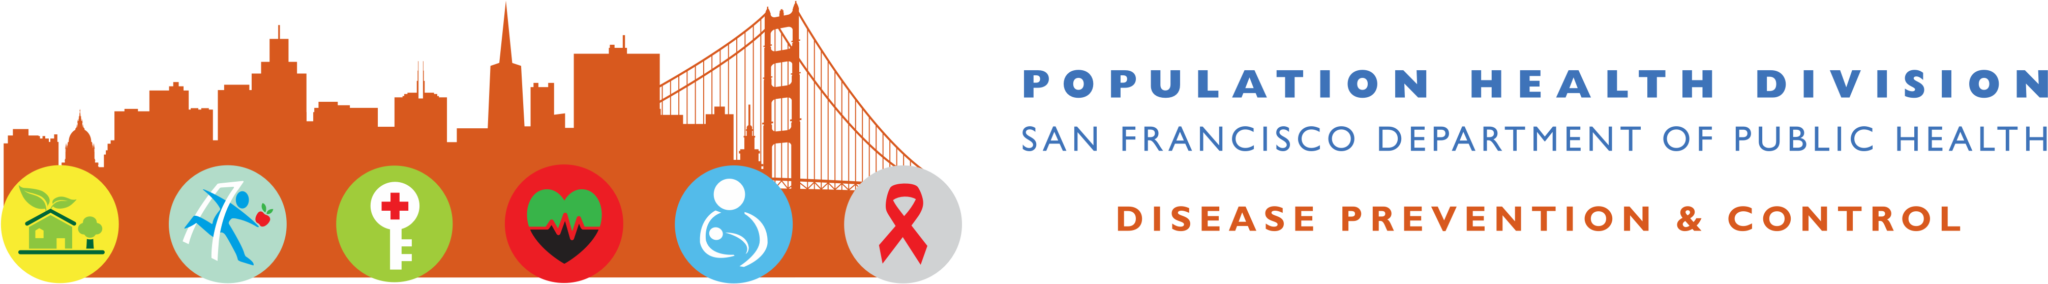 Population Health Division SF Department of Public Health